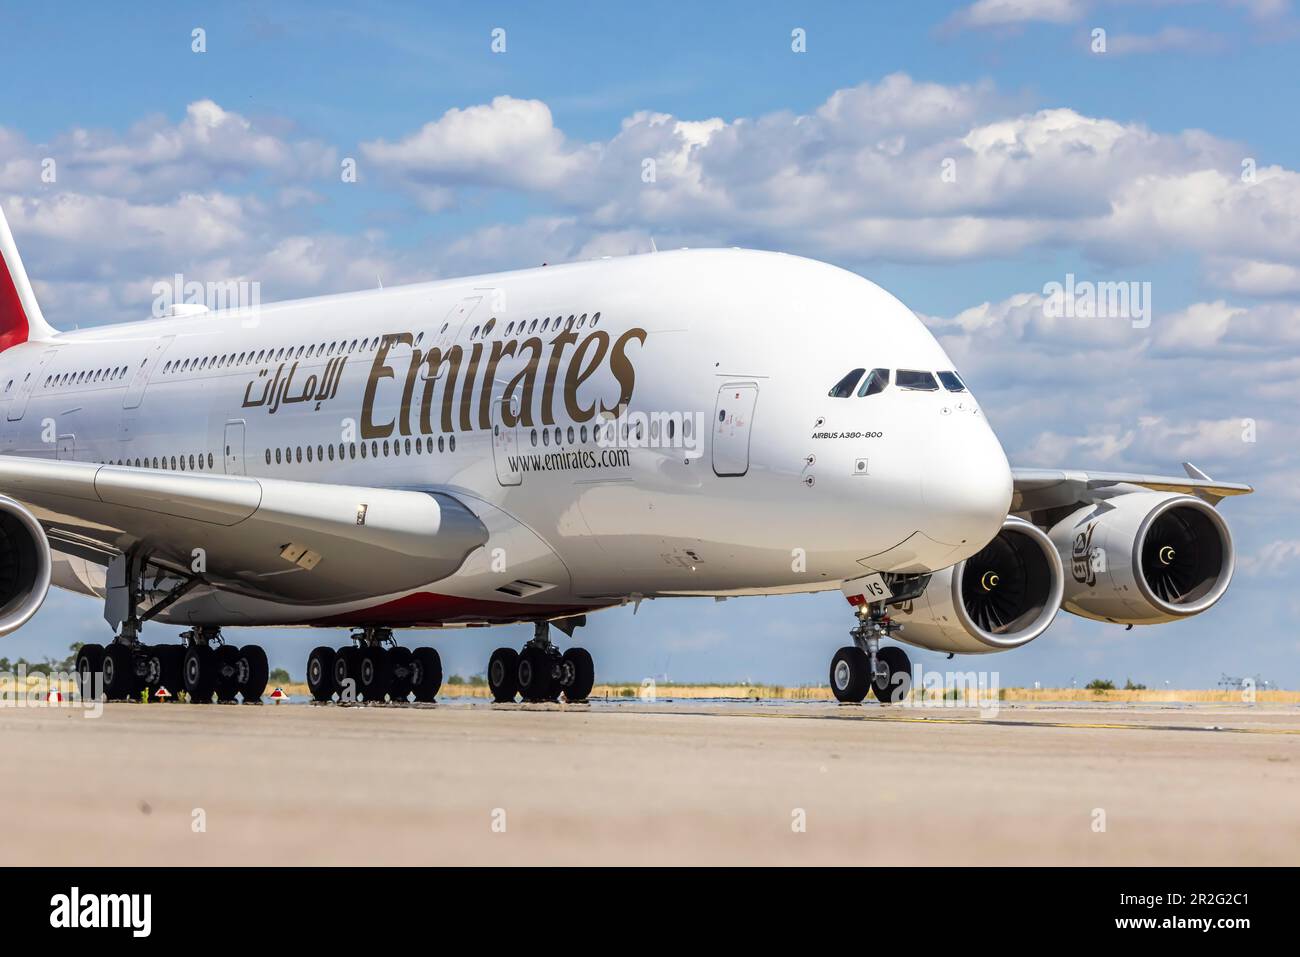 Airbus A380 (A380-842ILA) of the airline Emirates on the tarmac of the airport, ILA Berlin Air Show, International Aerospace Exhibition Berlin Stock Photo